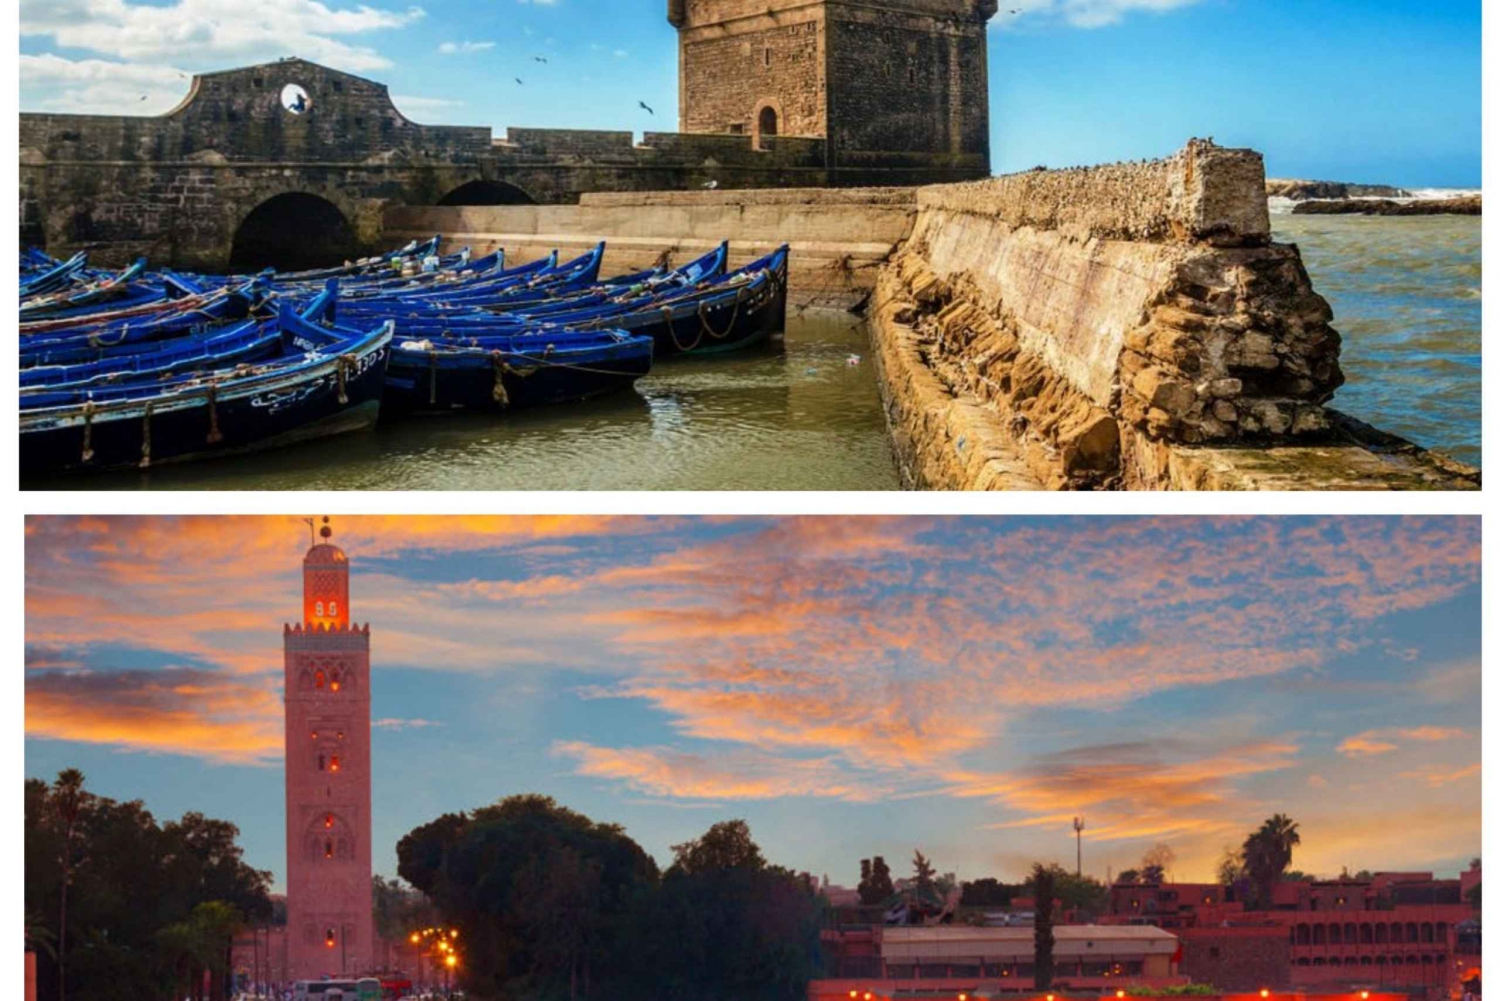 From Essaouira: Private Transfer to Marrakech